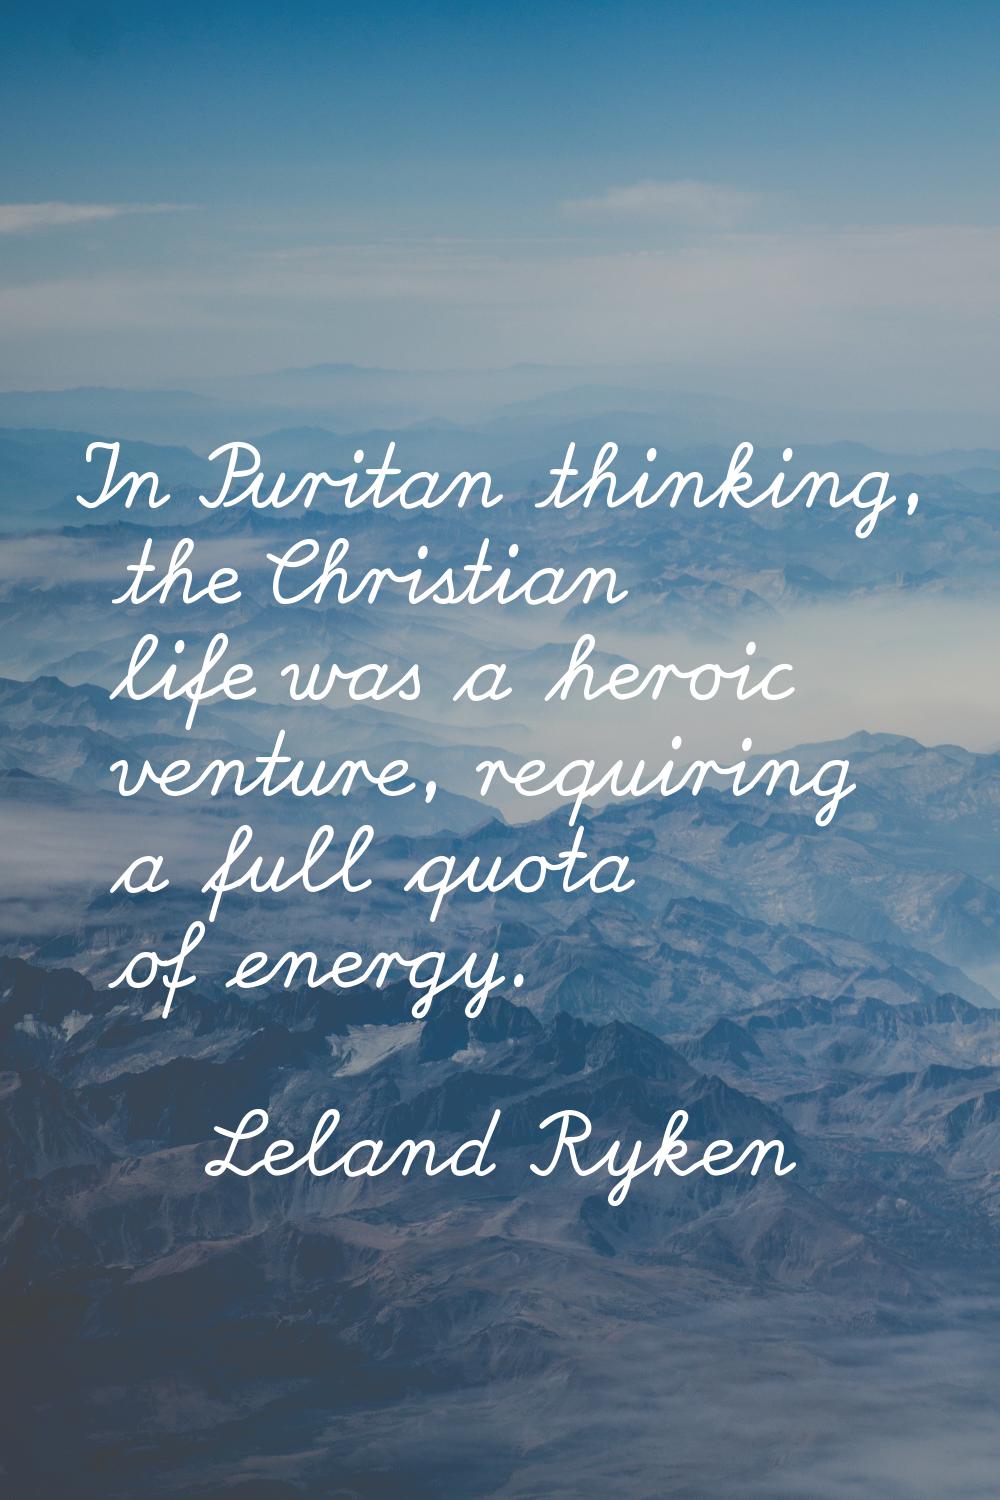 In Puritan thinking, the Christian life was a heroic venture, requiring a full quota of energy.